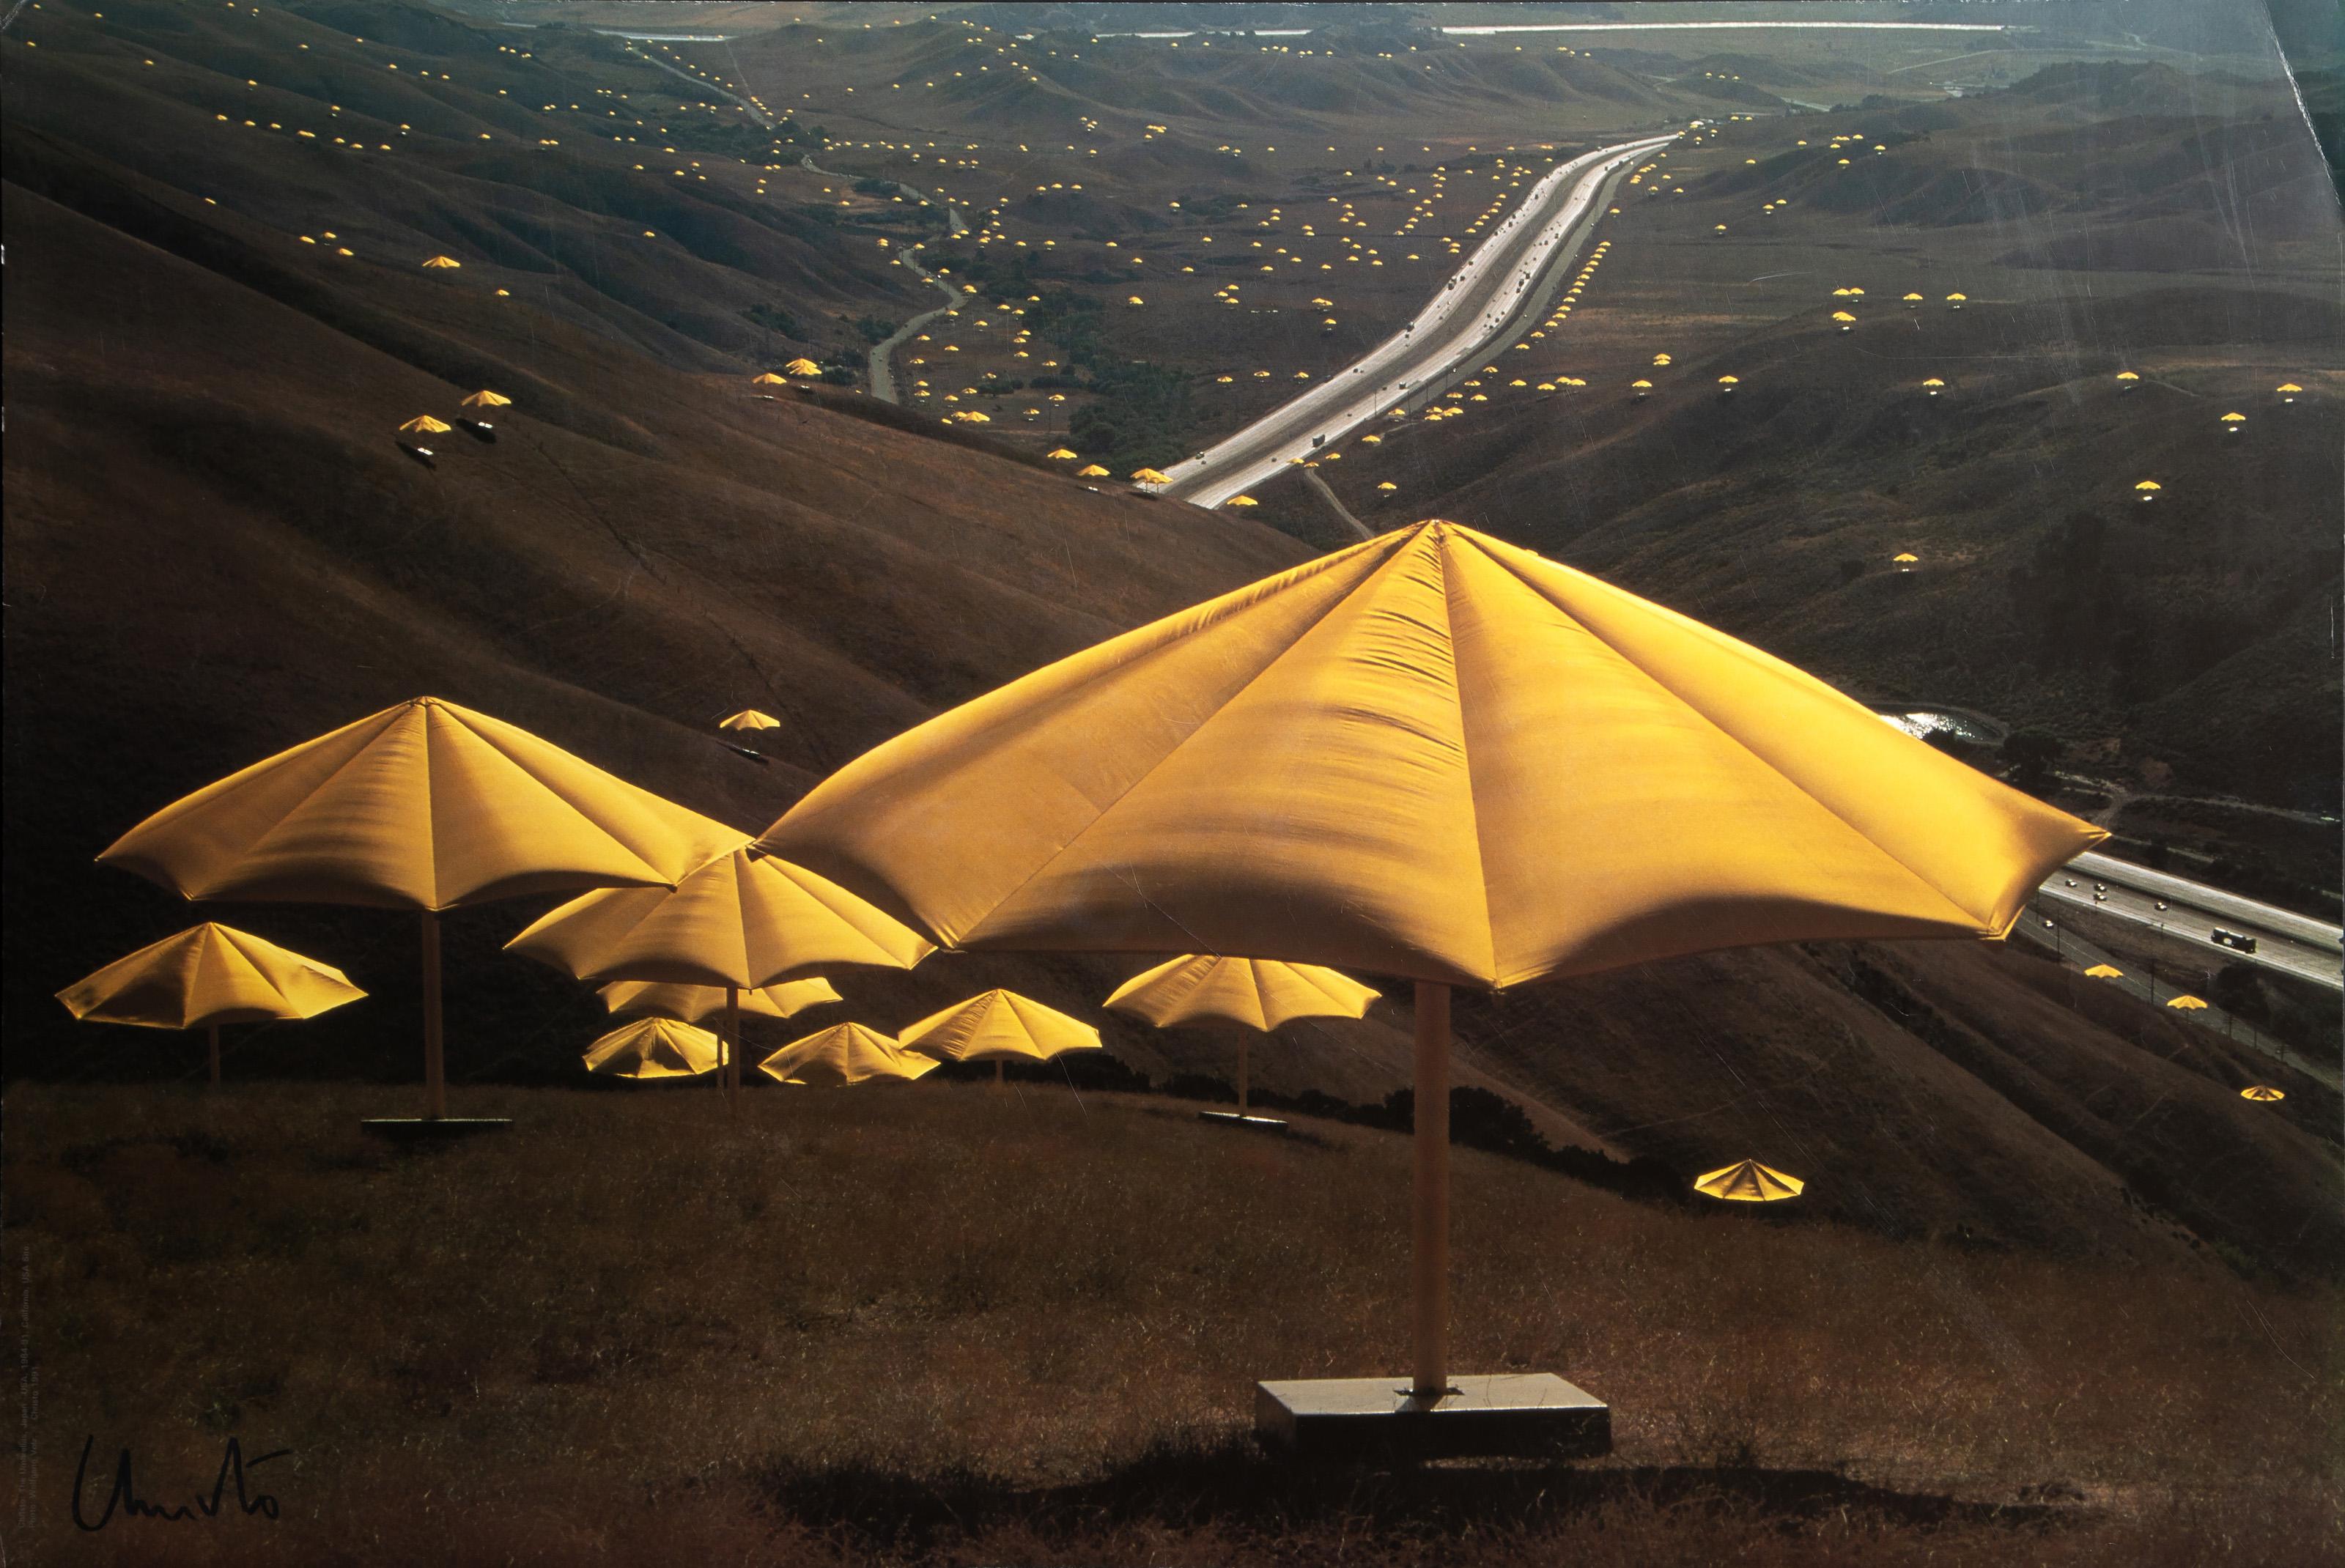  Christo and Jeanne-Claude, Bulgarian (1935 - 2020) - The Umbrellas, Year: 1991, Medium: Poster, signed in marker, Size: 25 x 37.5 in. (63.5 x 95.25 cm), Description: Image by Wolfgang Volz.